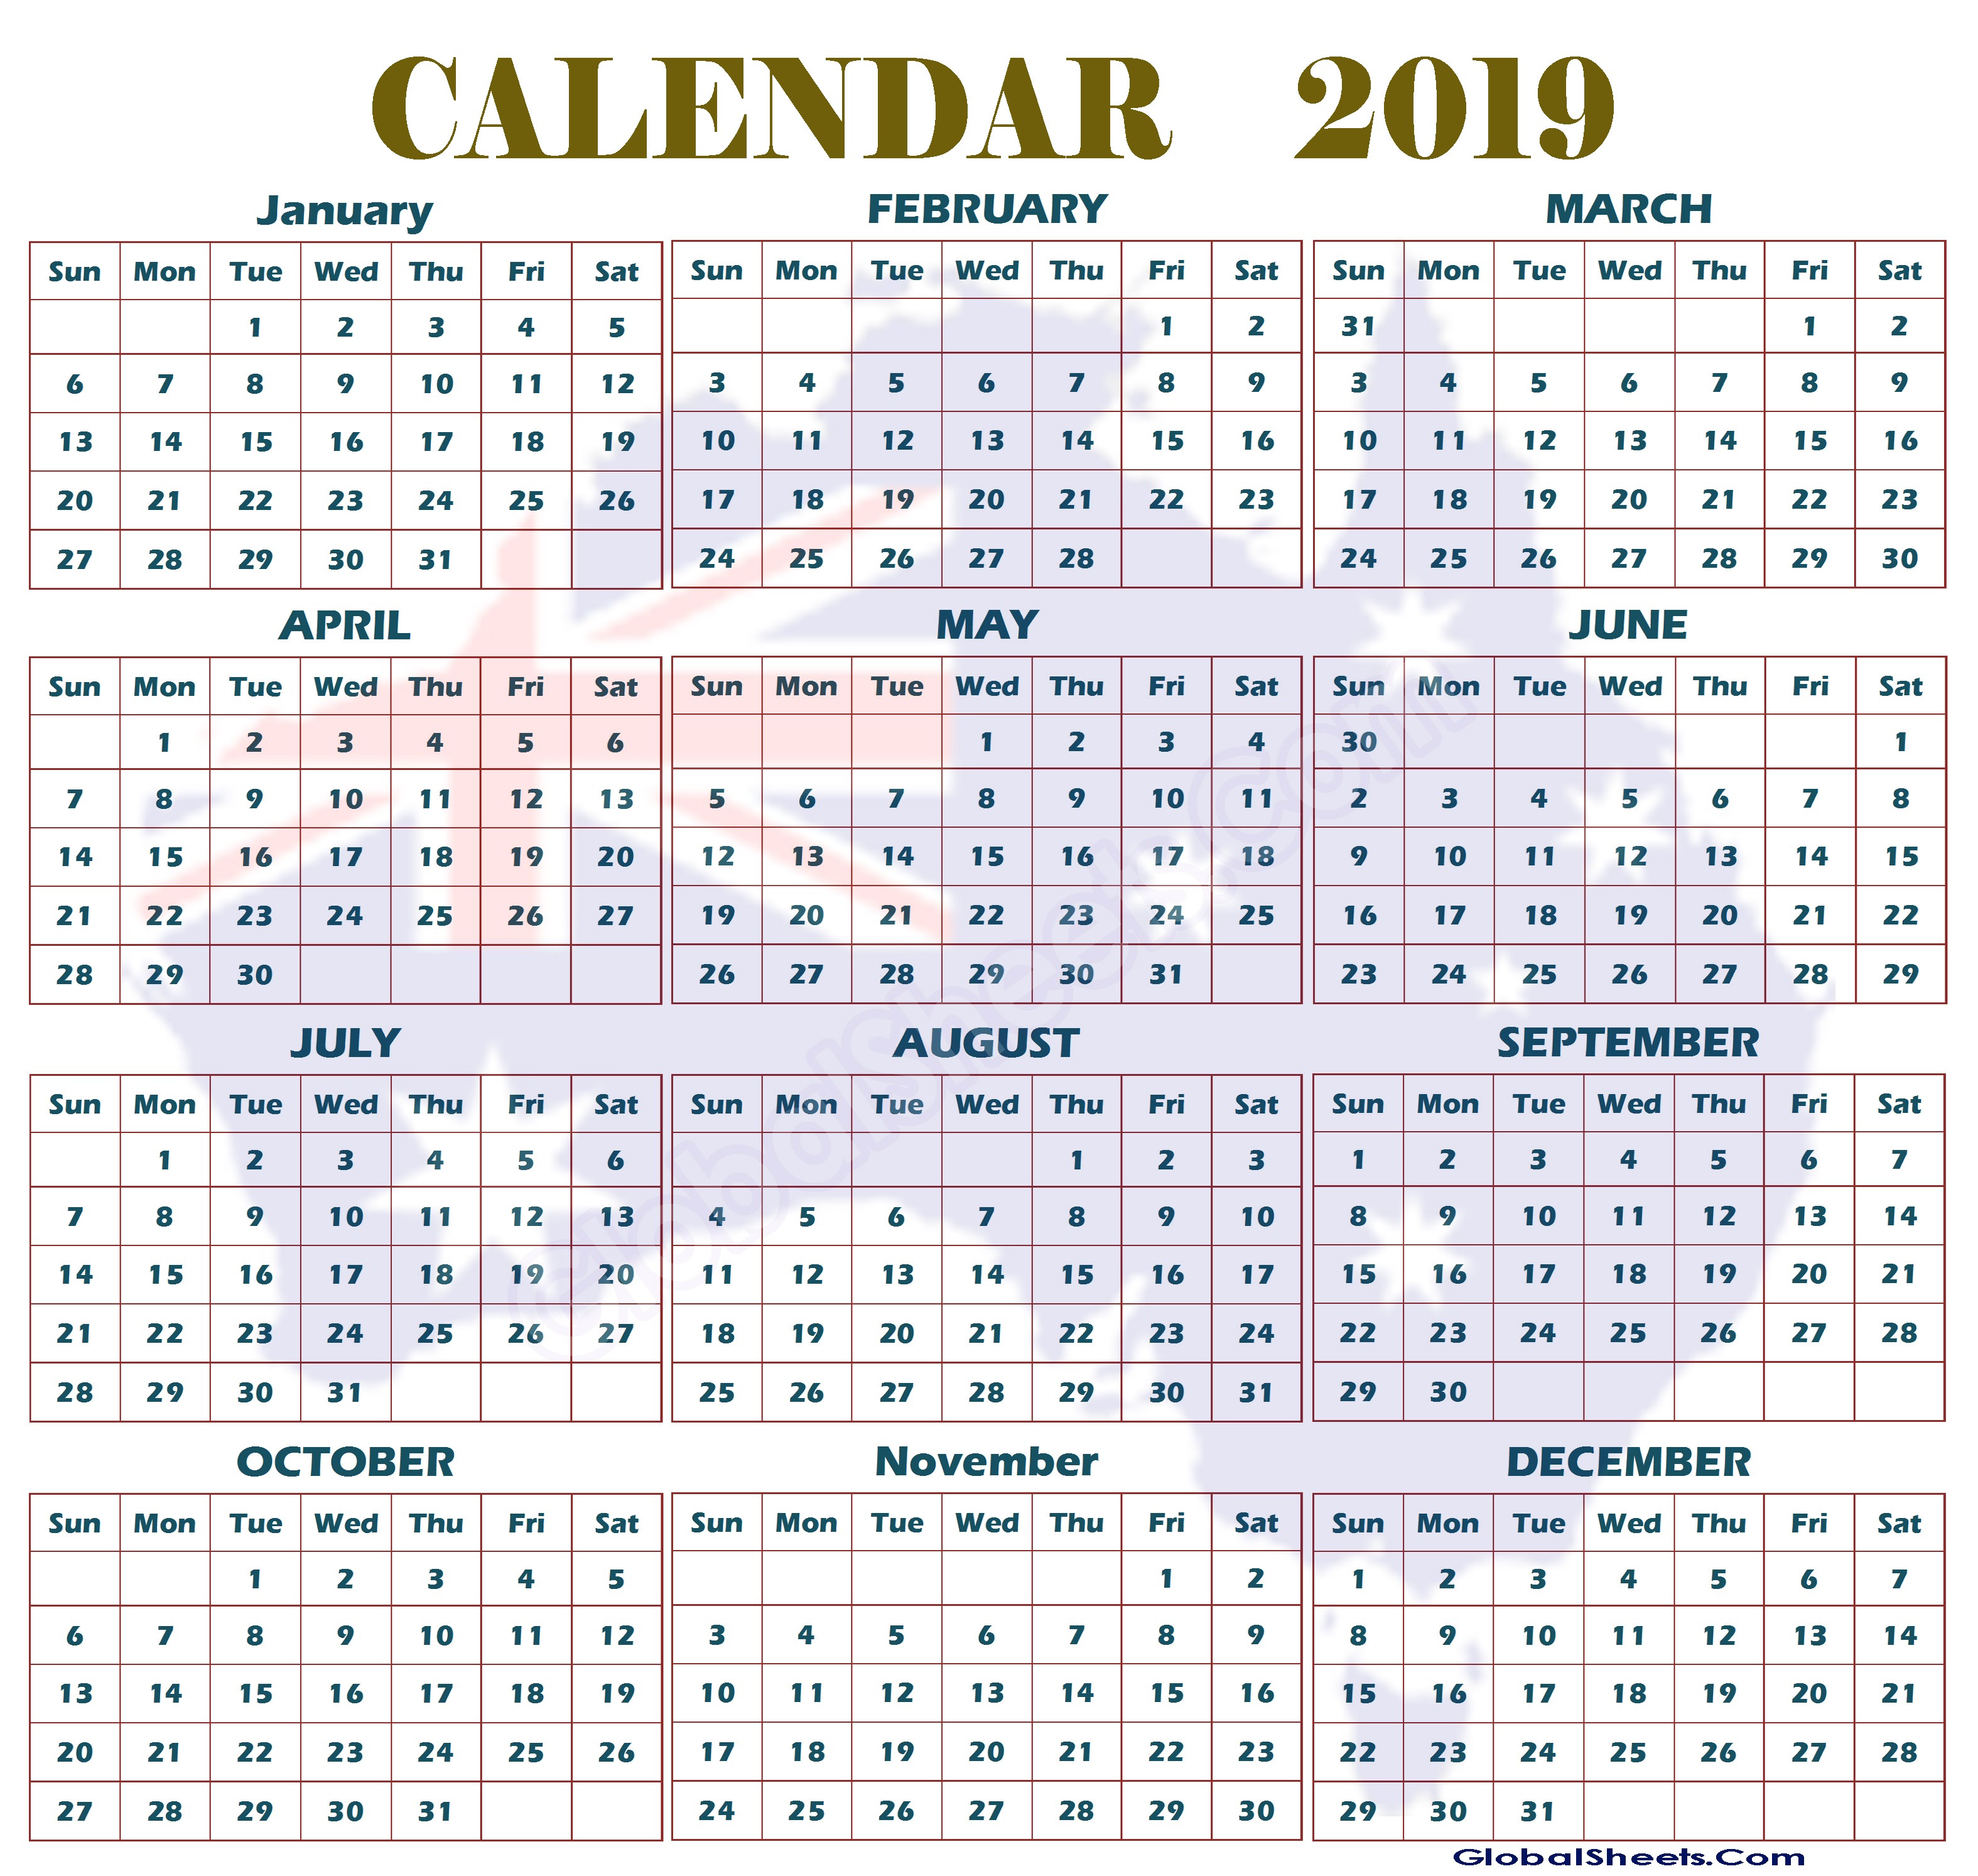 january-2019-calendar-templates-for-word-excel-and-pdf